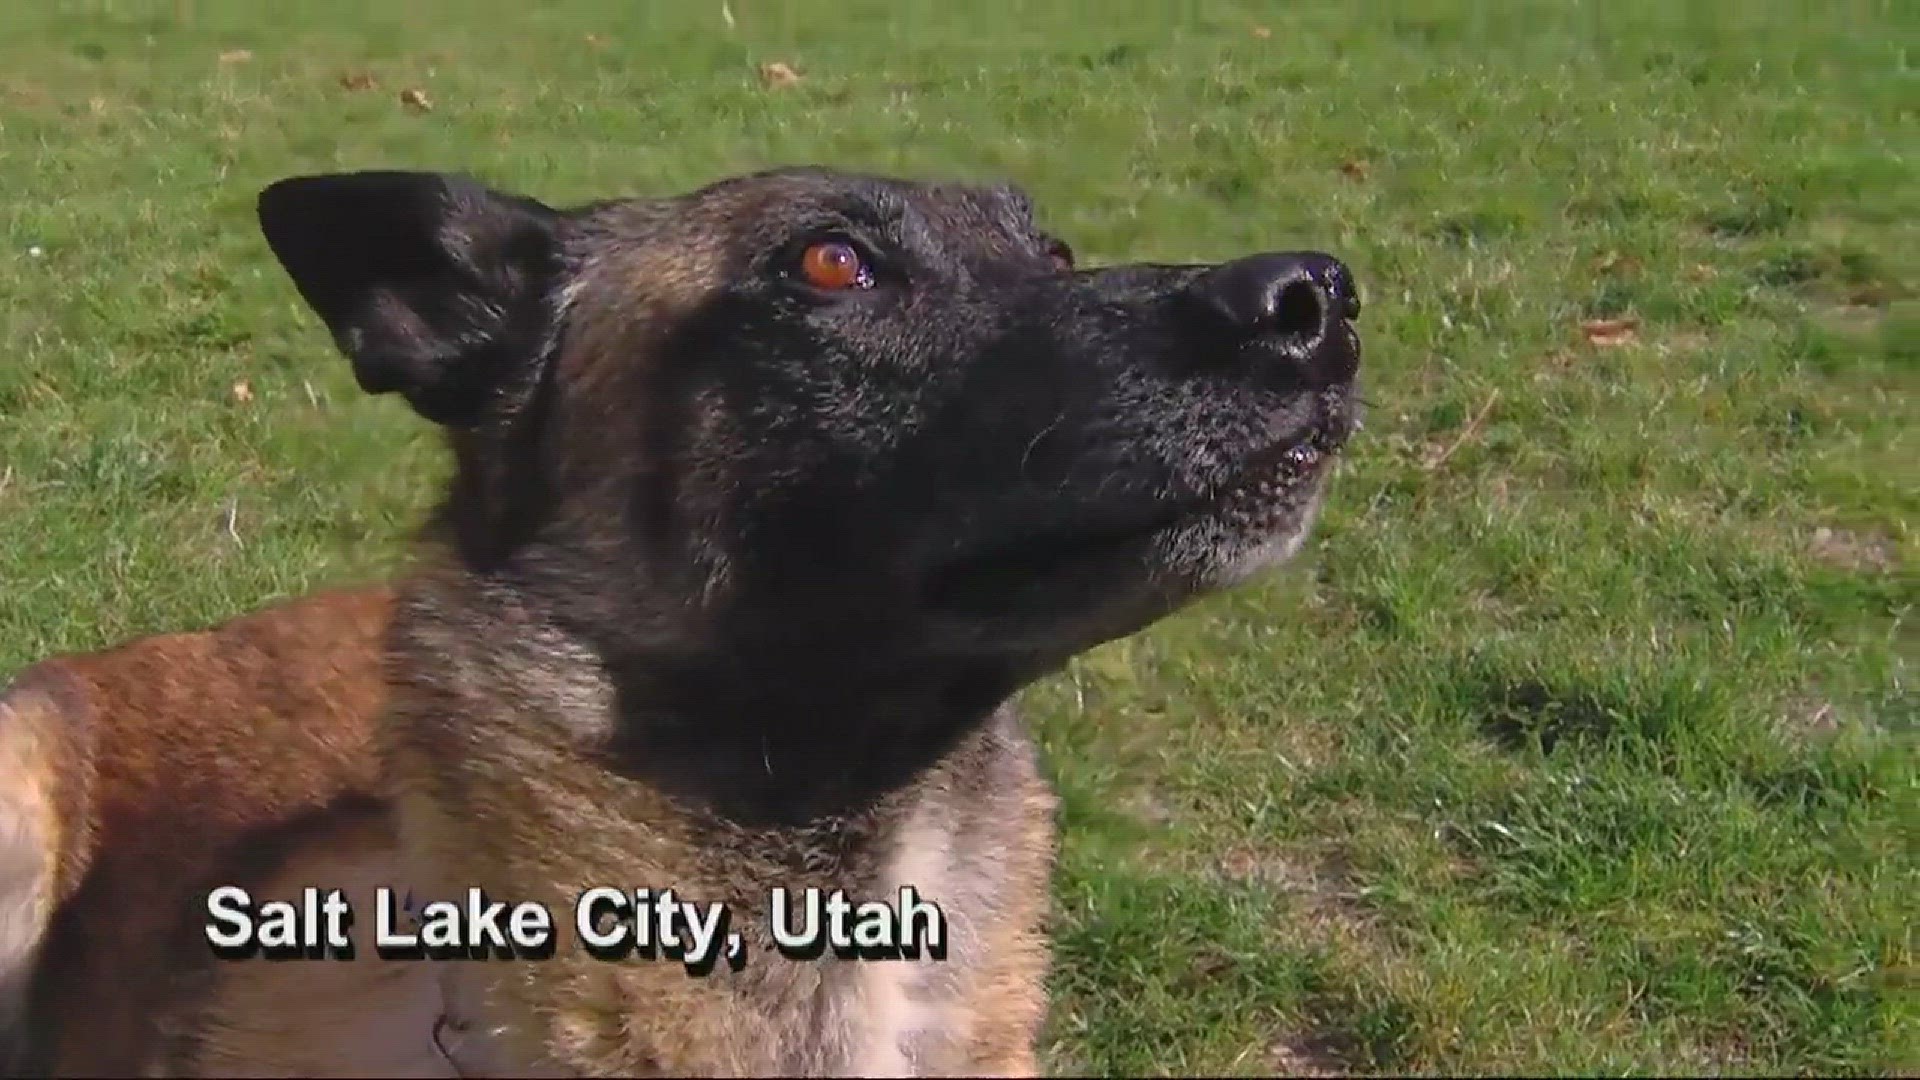 Decades before highly trained K9s arrived on the scene, the Salt Lake City Police Department boasted a different kind of police dog, and he remained a presence long after his death.